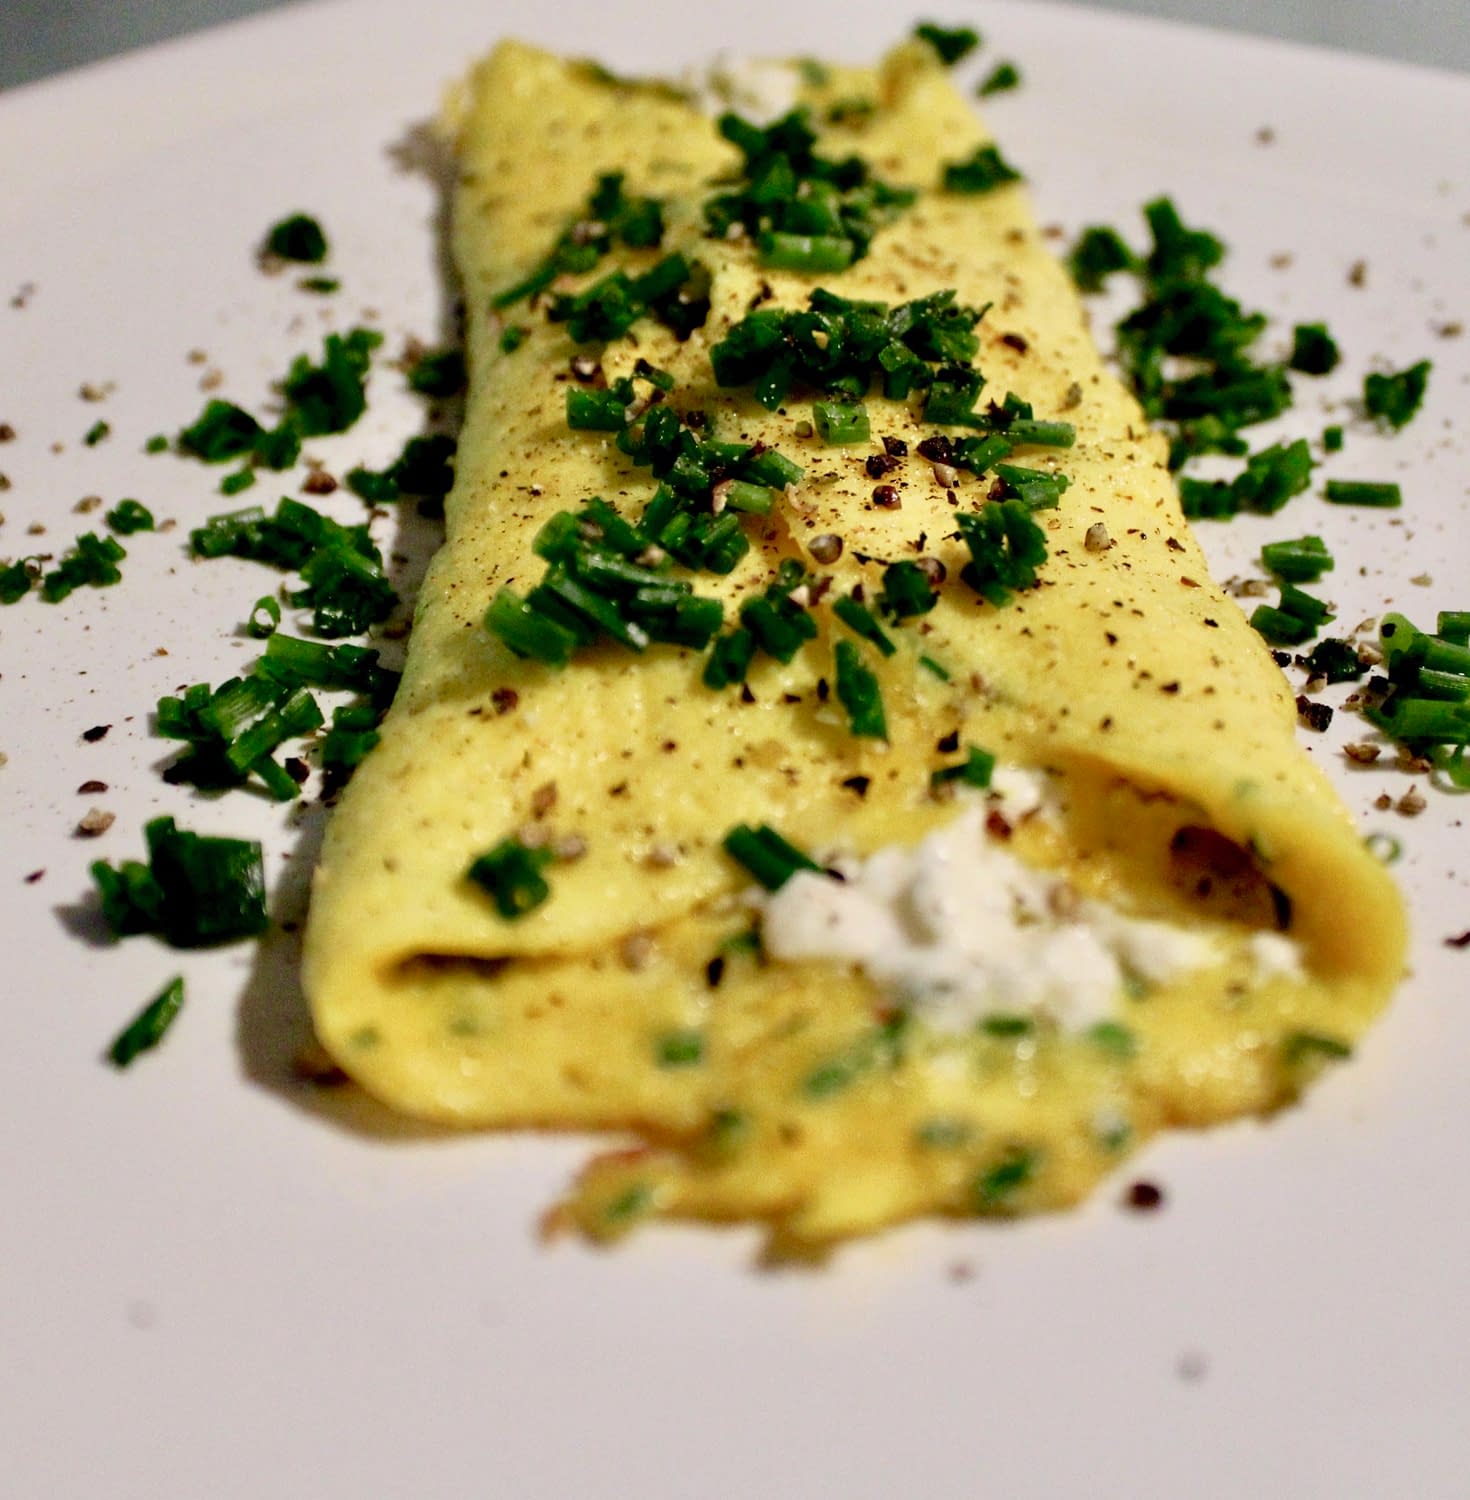 French omelette garnished with chives and black pepper.